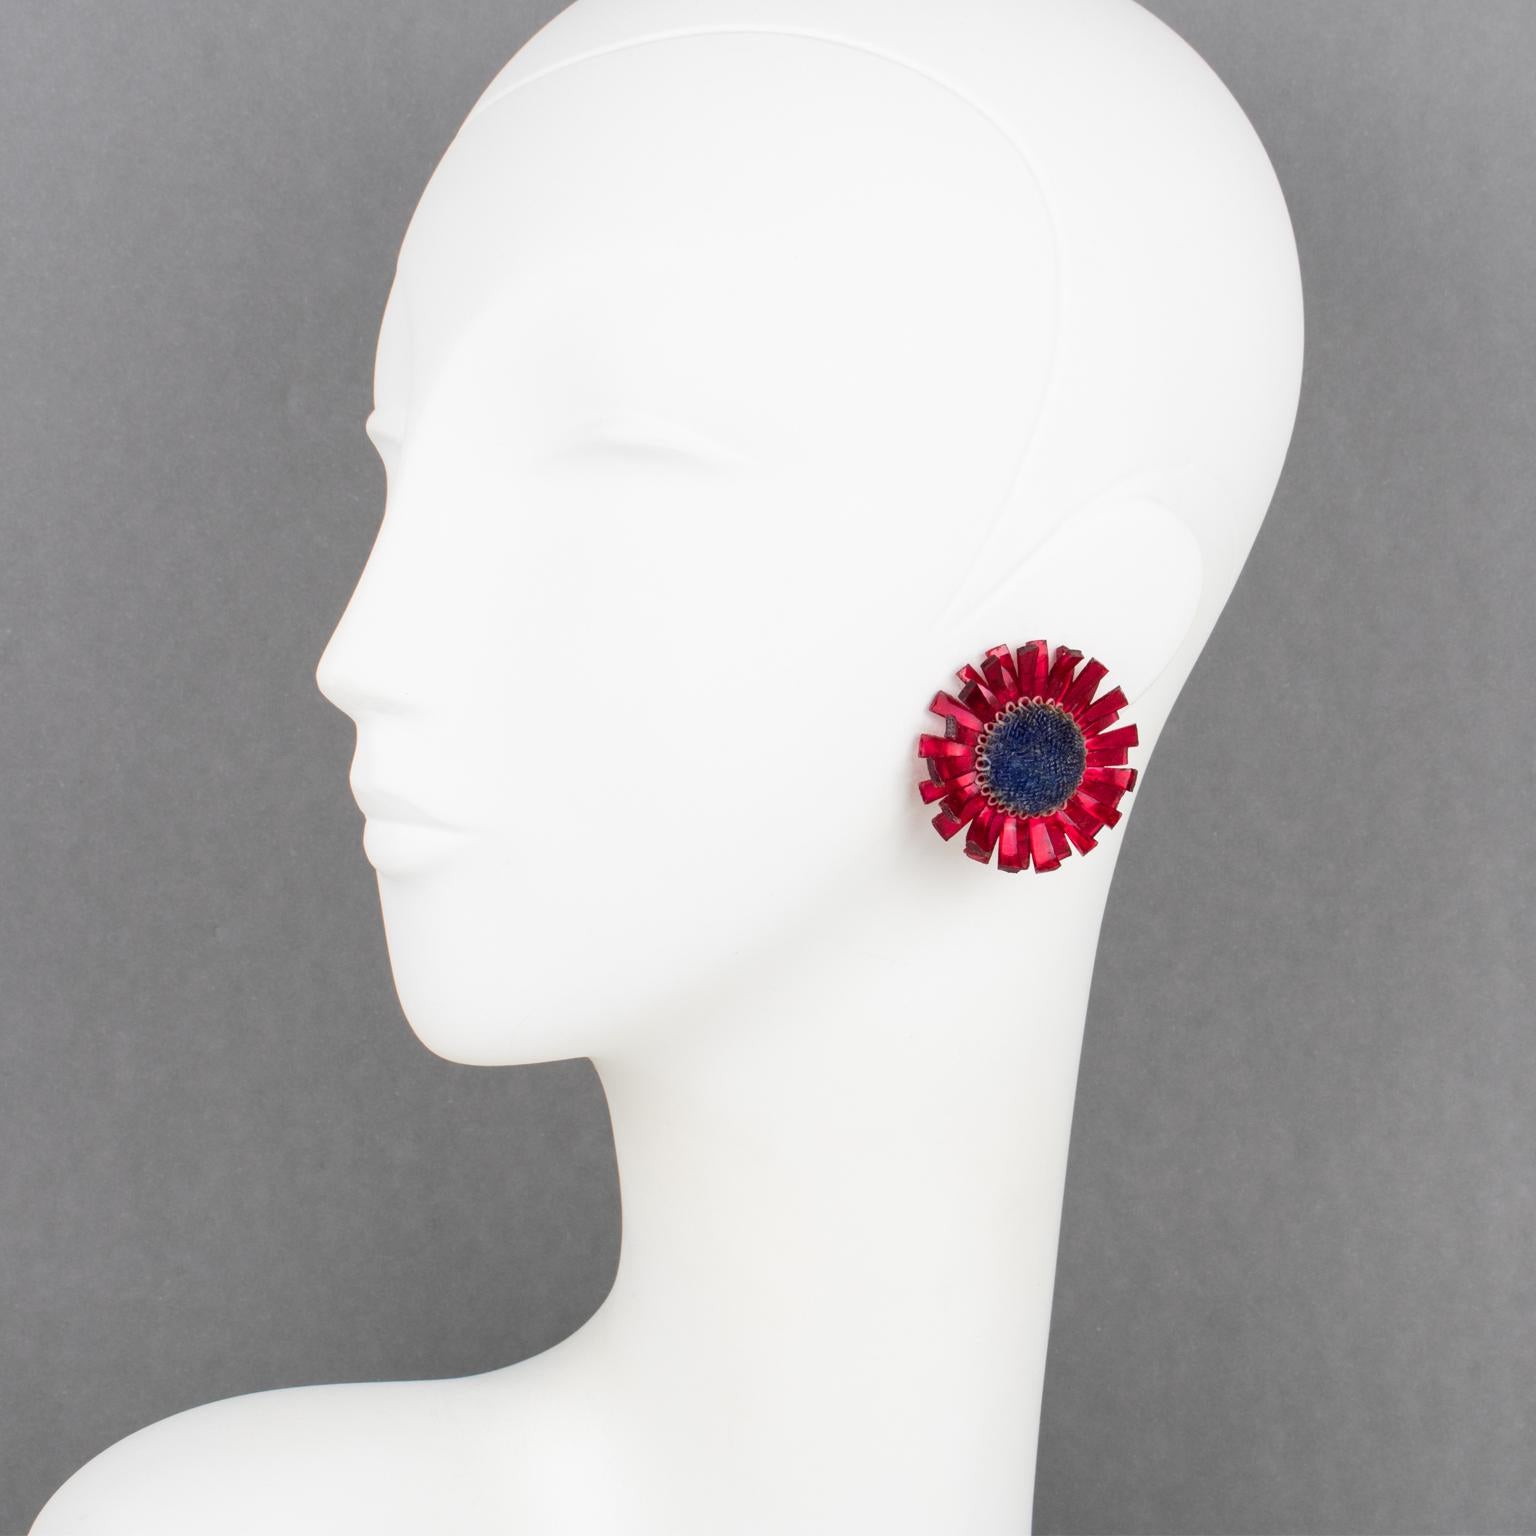 These exquisite Monique Vedie resin or Talosel clip-on earrings feature a thistle flower shape in a carved dimensional design with a textured pattern in luminous, pearlized carmine red color contrasted with a navy blue textured heart. They are the